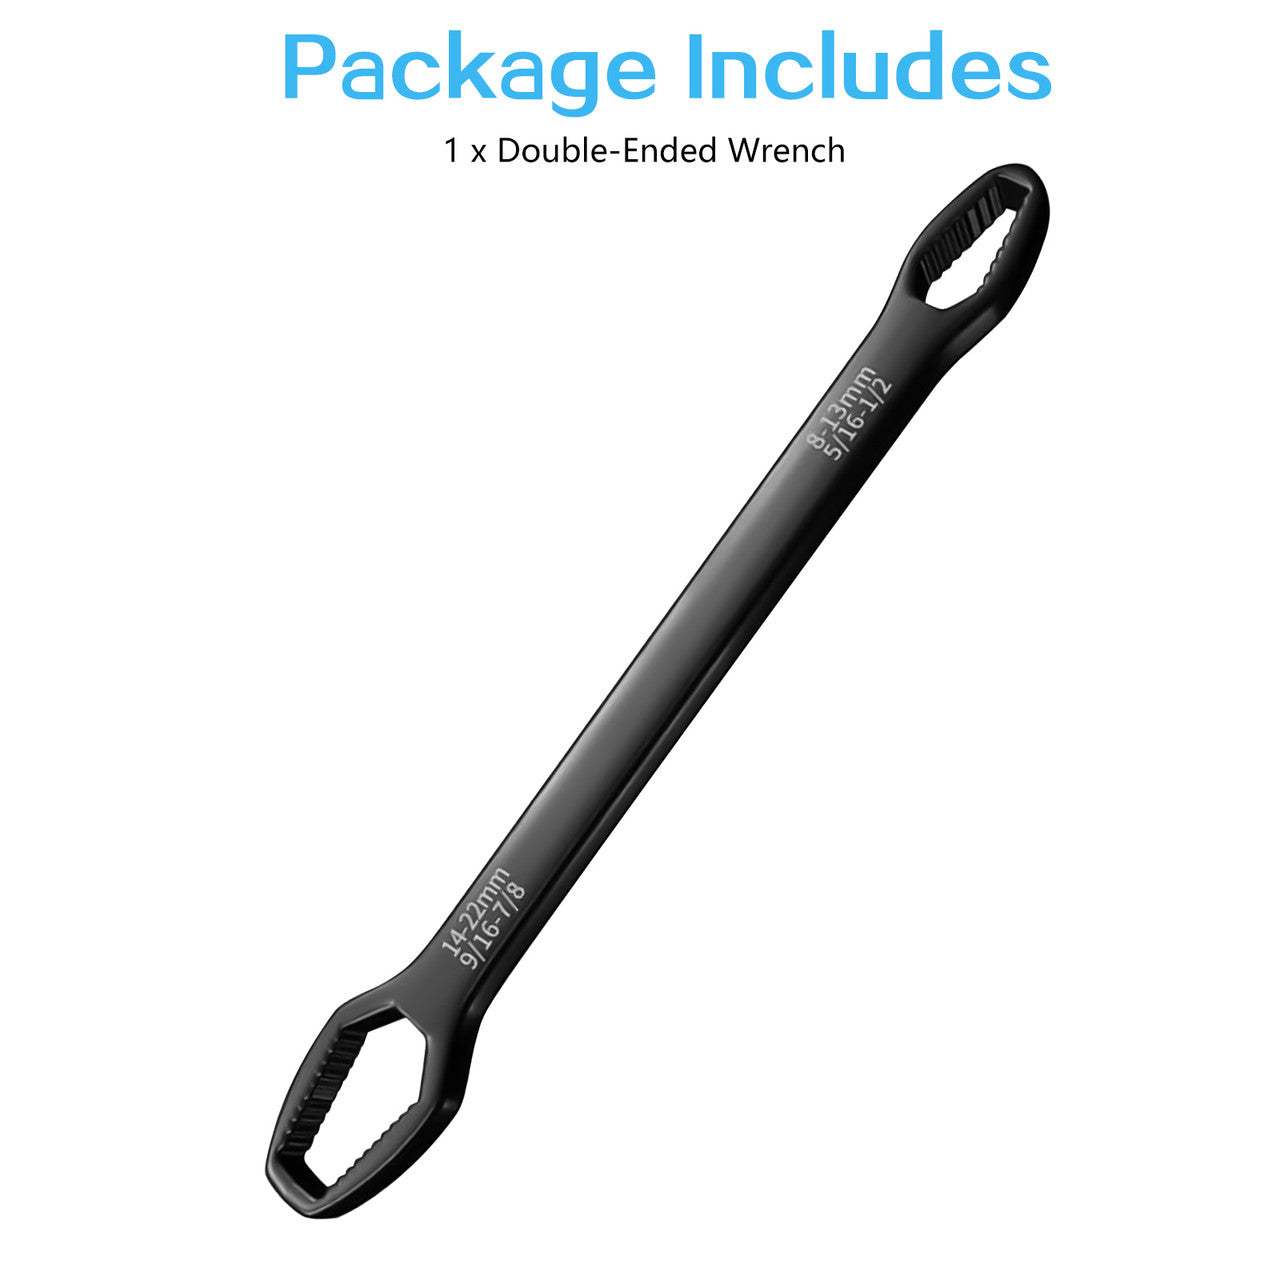 Practical Double-head Adjustable 8-22mm Ratchet Spanner with a Ultra Thin Design